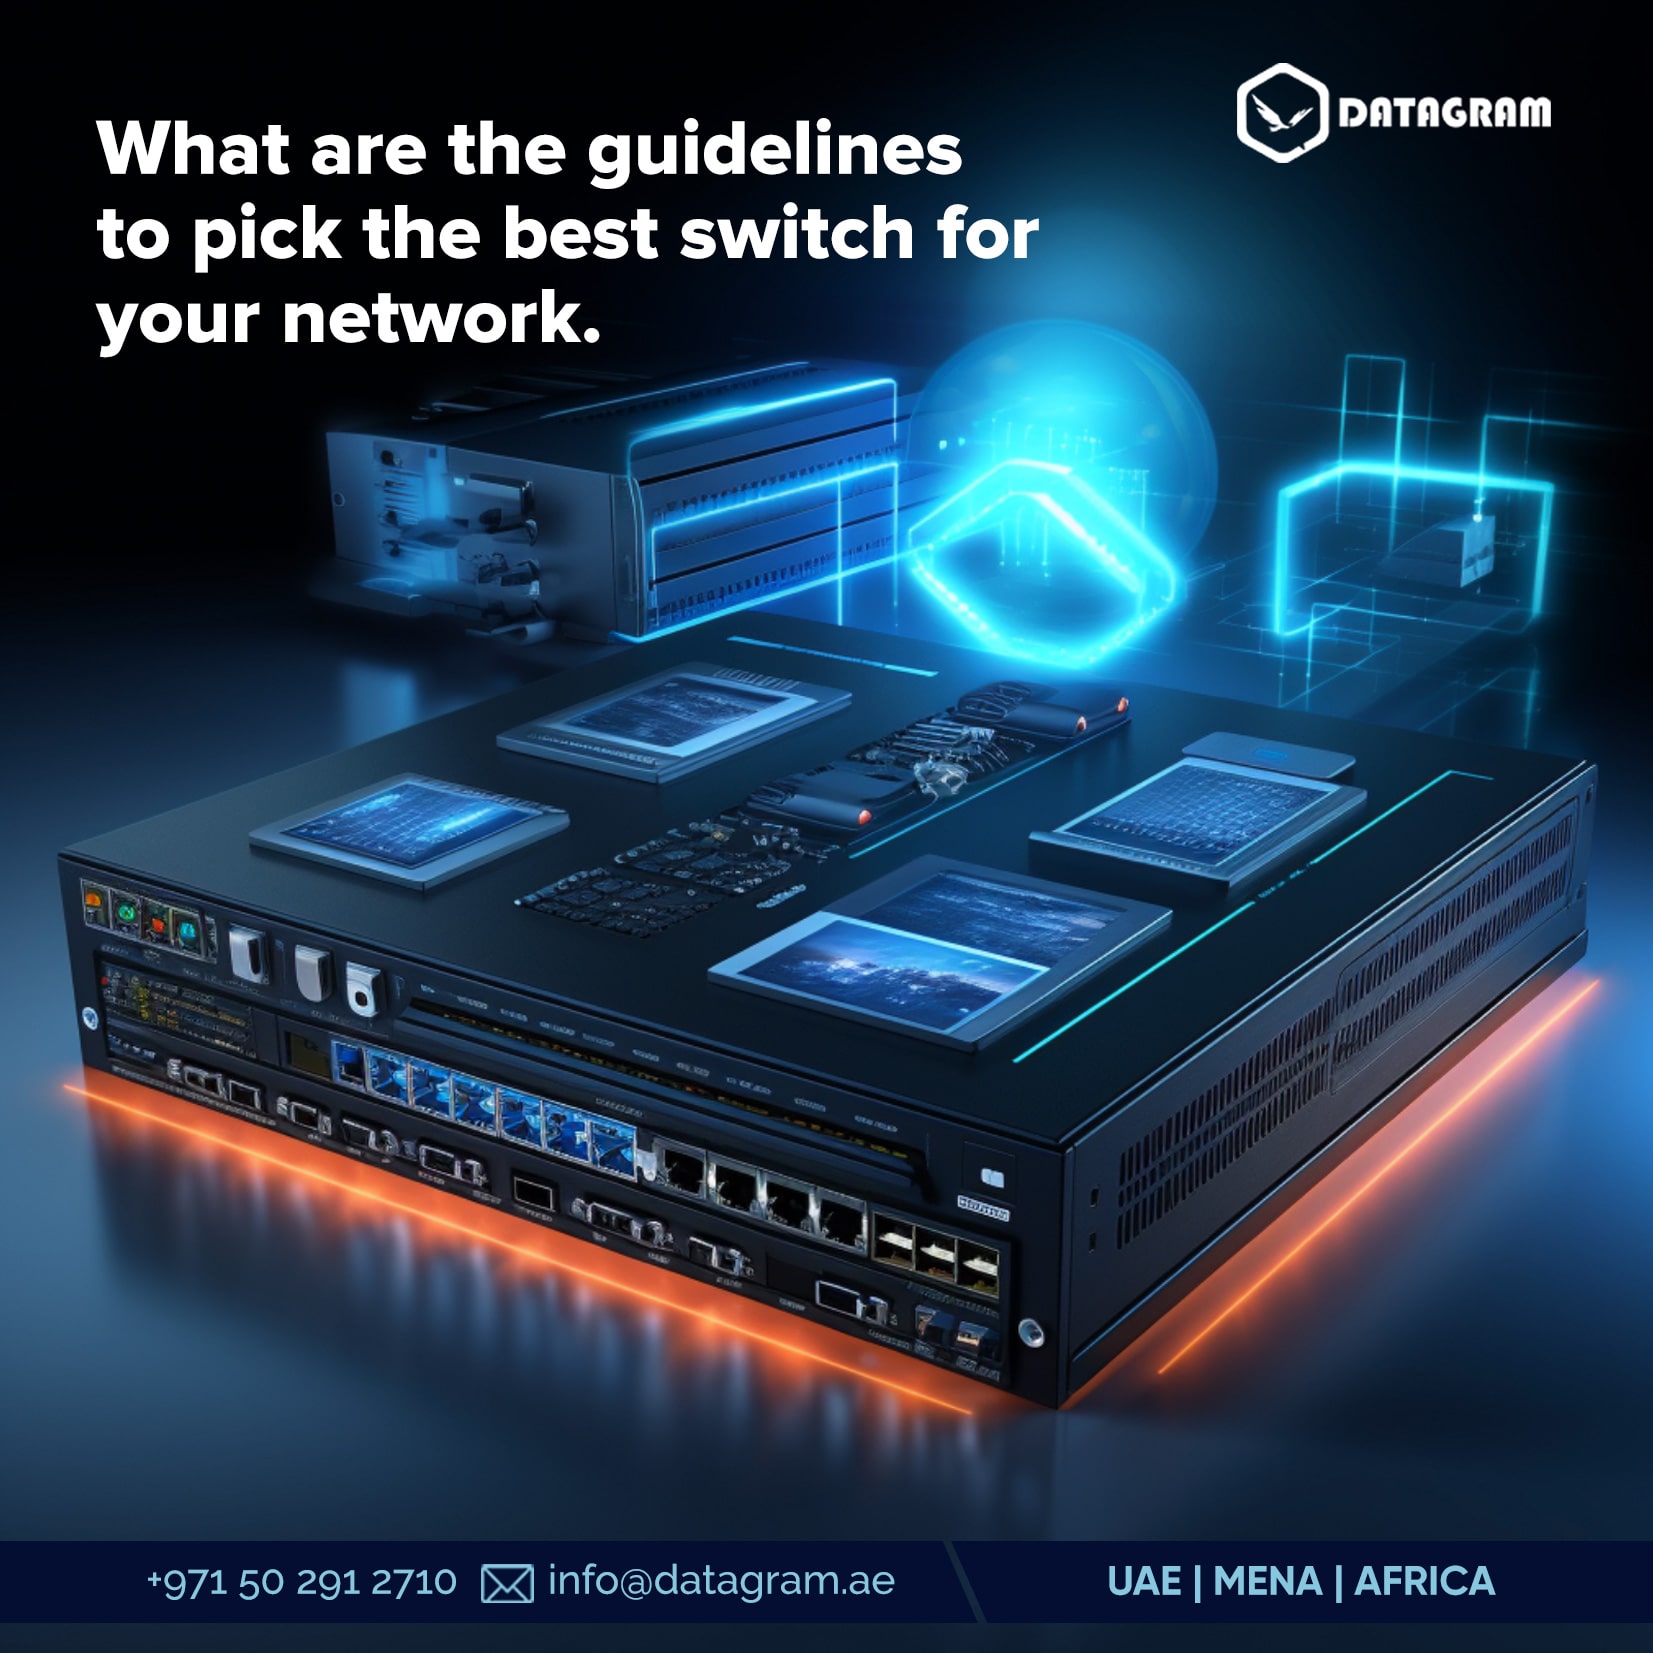 What are the guidelines for picking the best switch for your network?